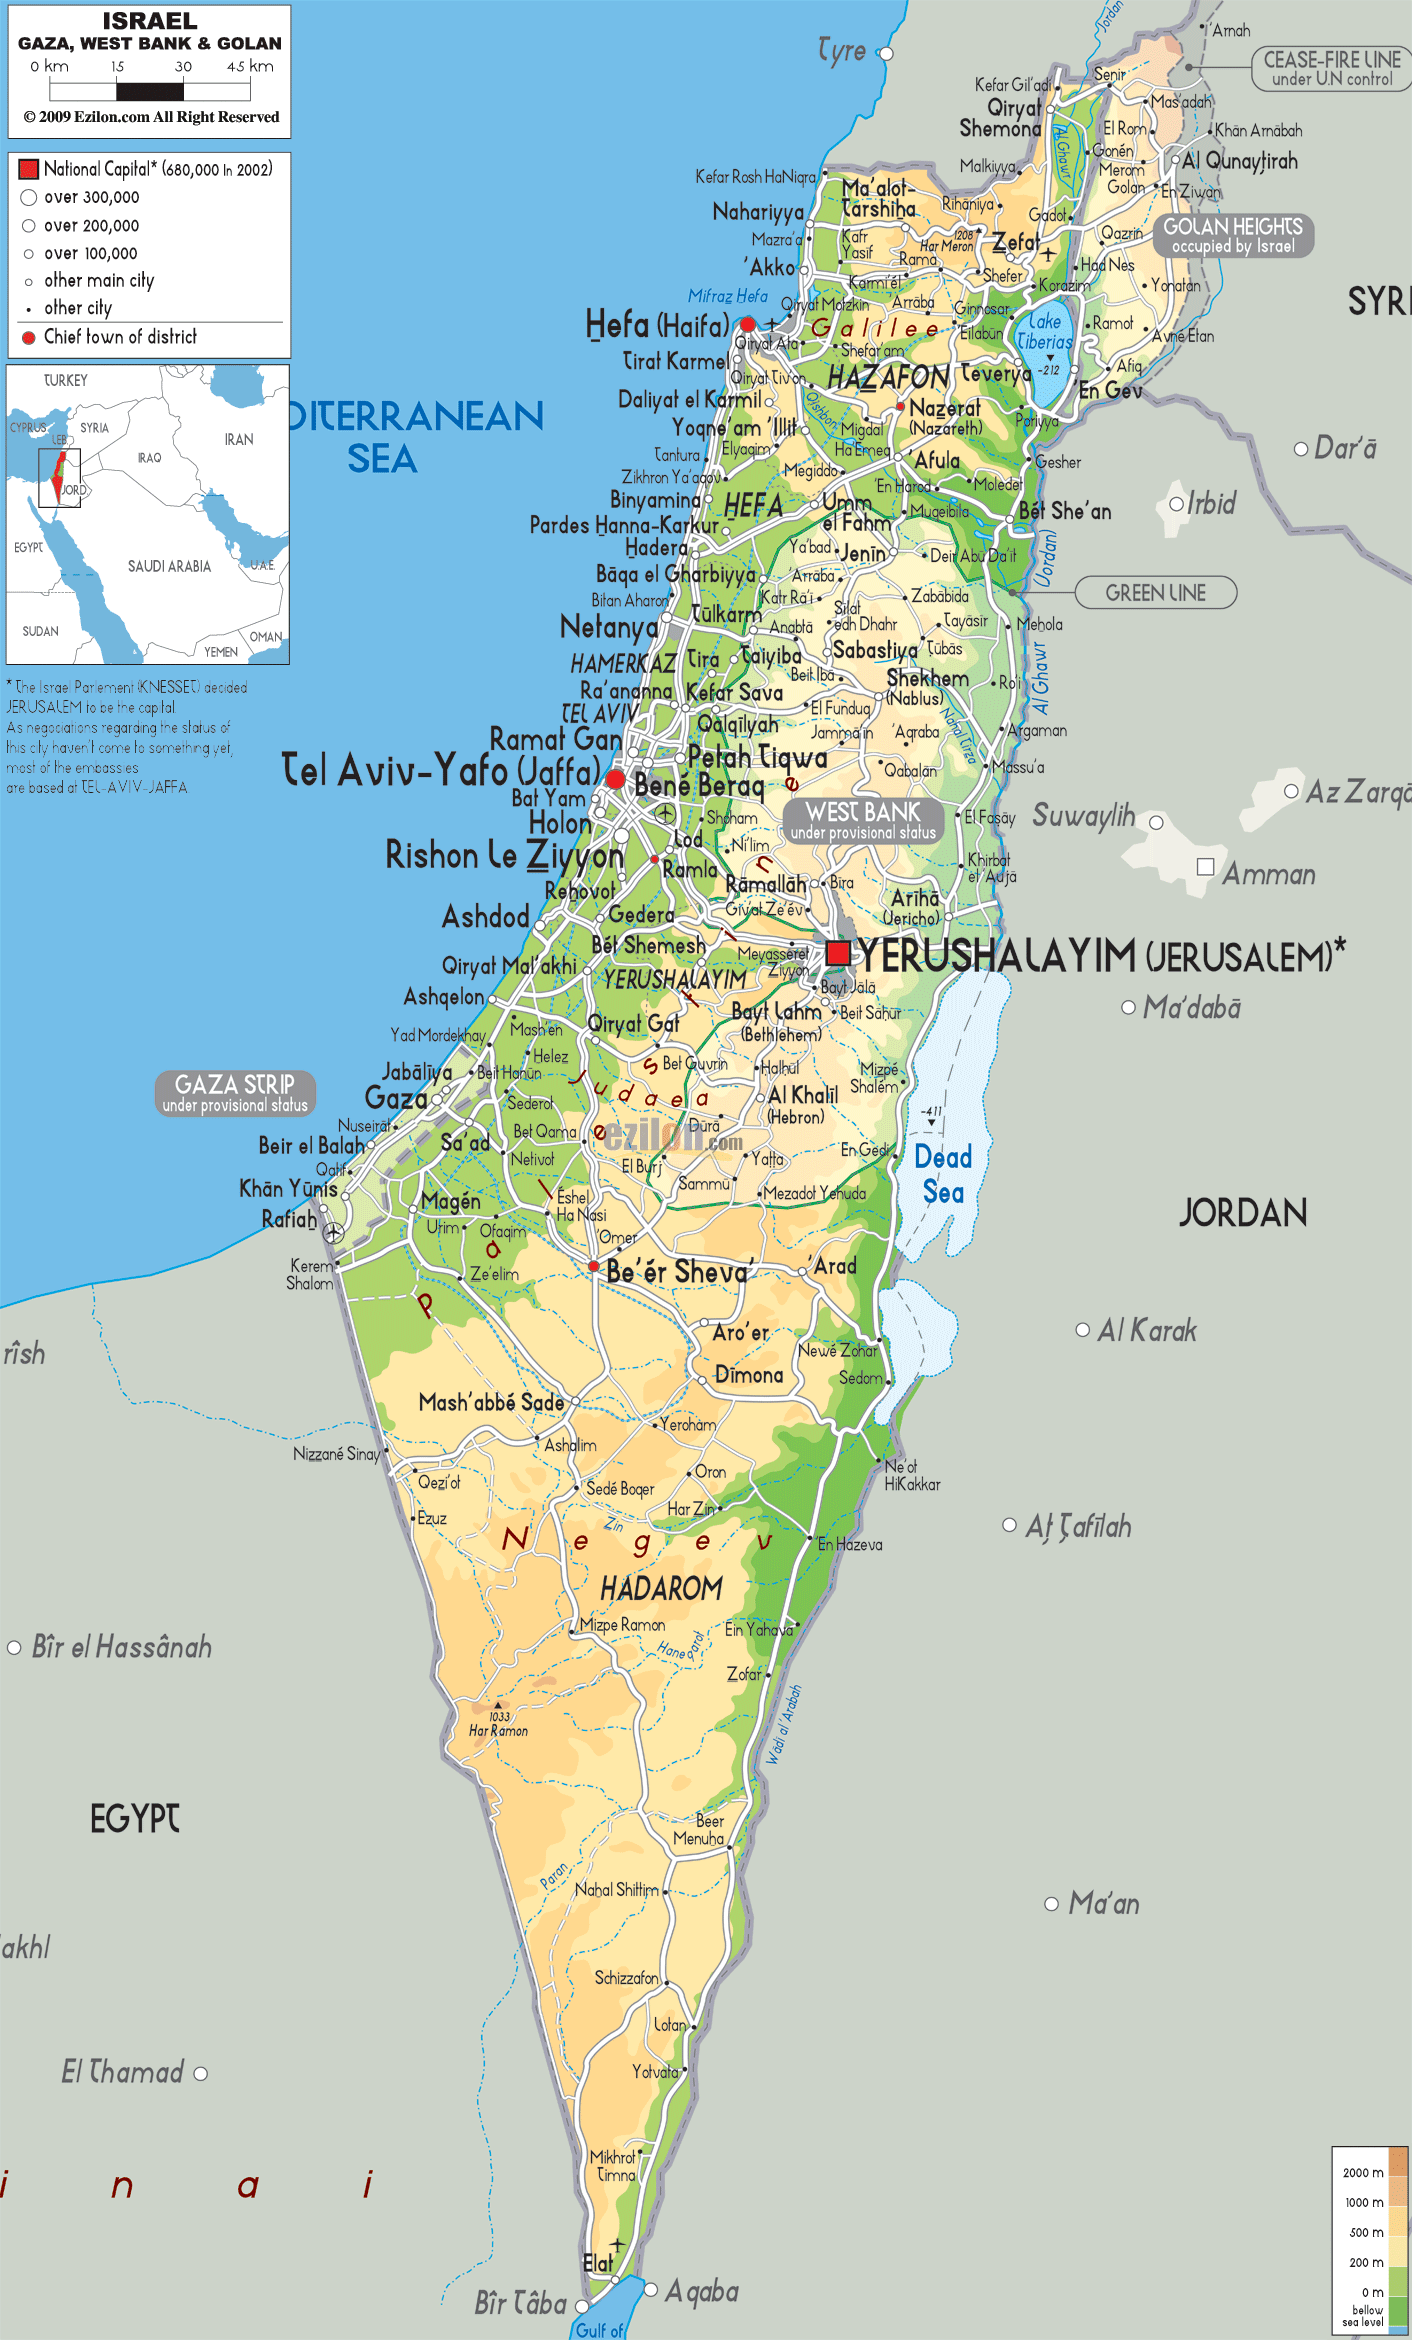 http://www.ezilon.com/maps/images/asia/Israel-physical-map.gif